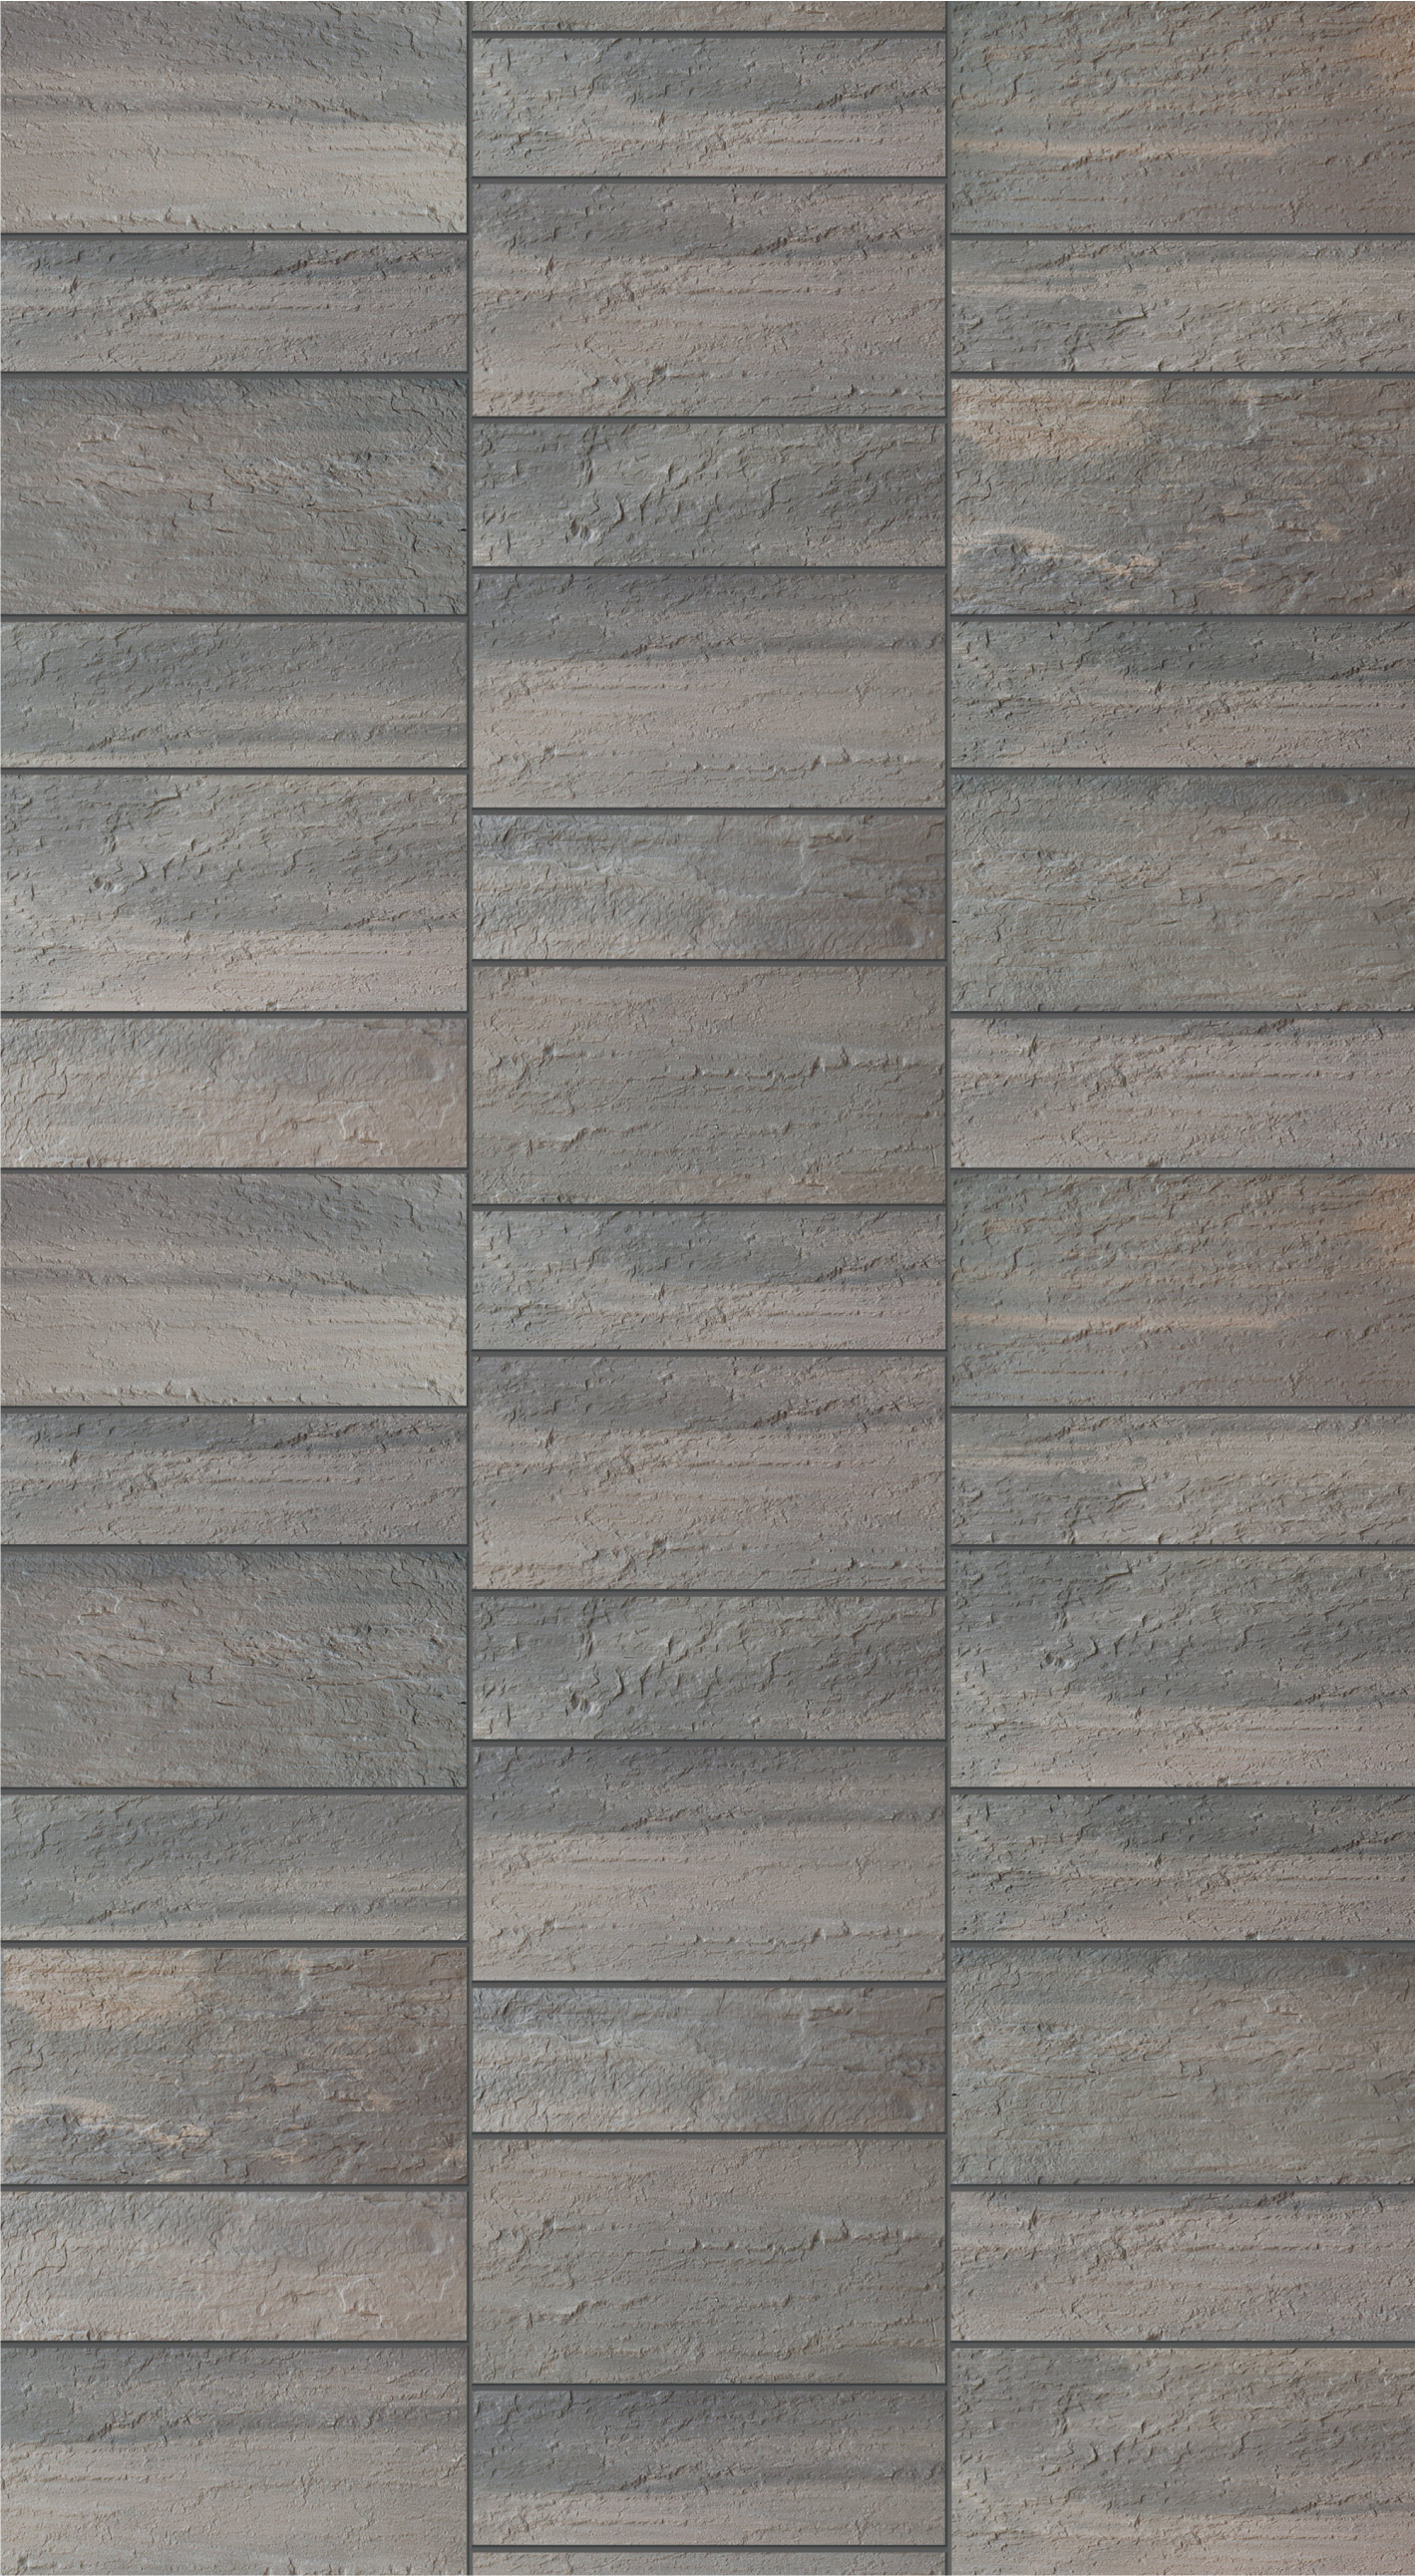 Oasis-Stone-combination-of-two-sizes-600x300-_-600x150-mm-with-seam-8mm-of-043-grout-color